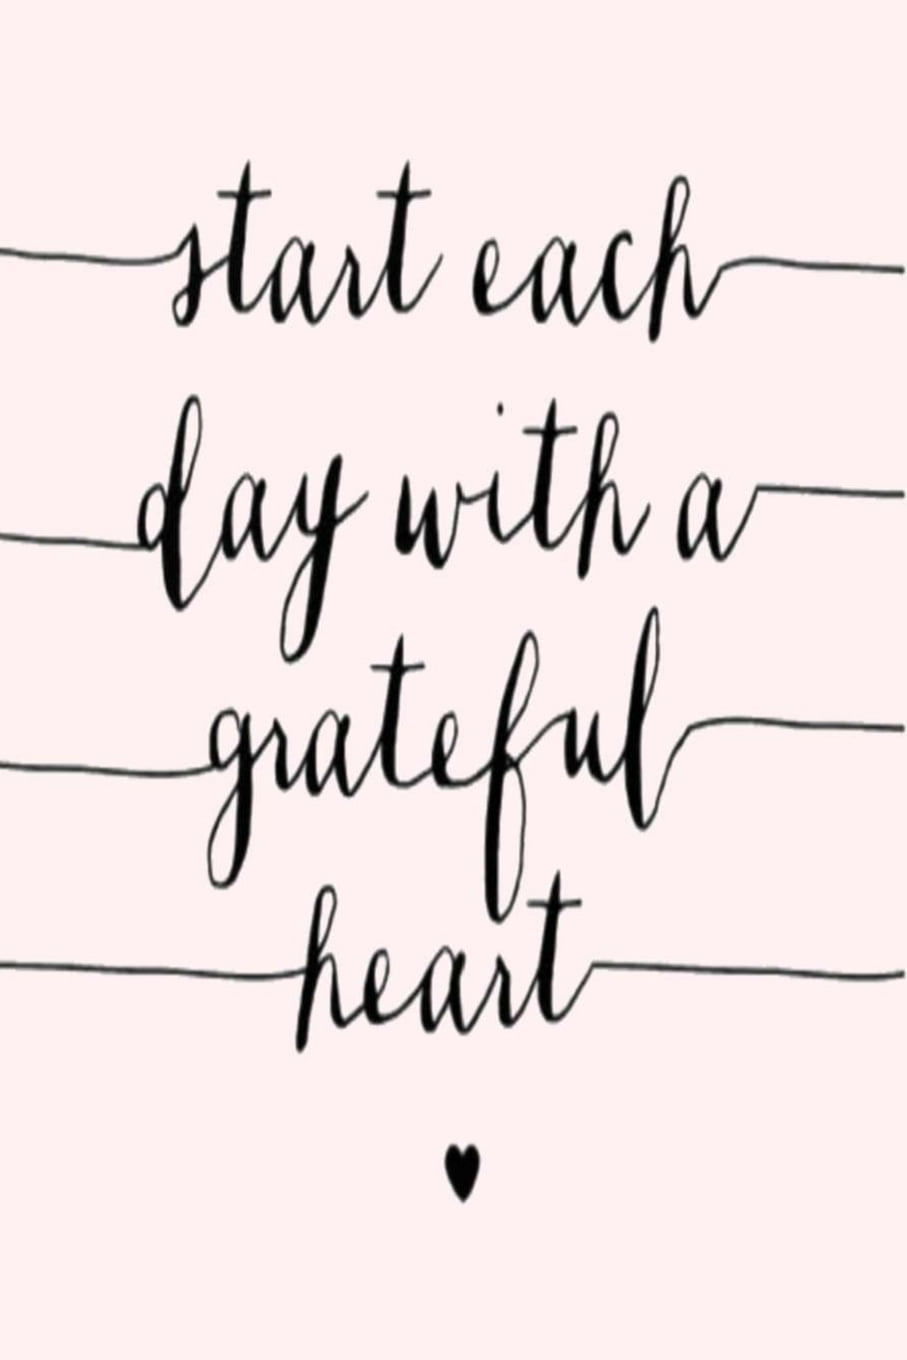 Outstanding Daily Encouragement Notebooks for All: Start Each Day with a  Grateful Heart: A Gratitude Journal to Win Your Day Every Day, 6X9 Inches